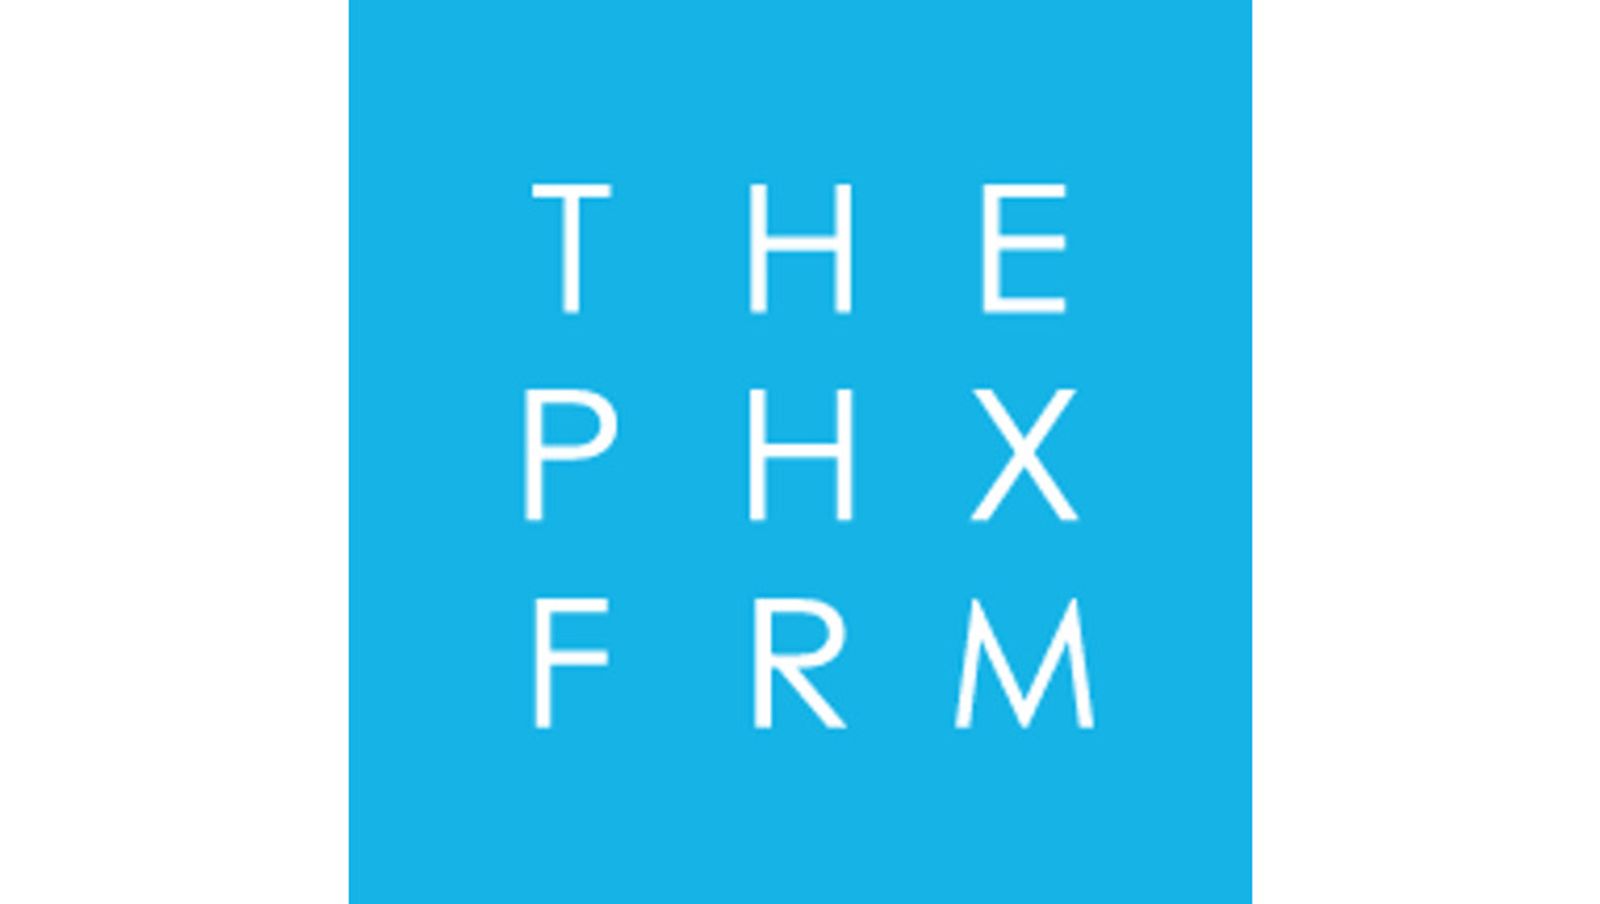 CCBill Announces New Additions to The Phoenix Forum 2019